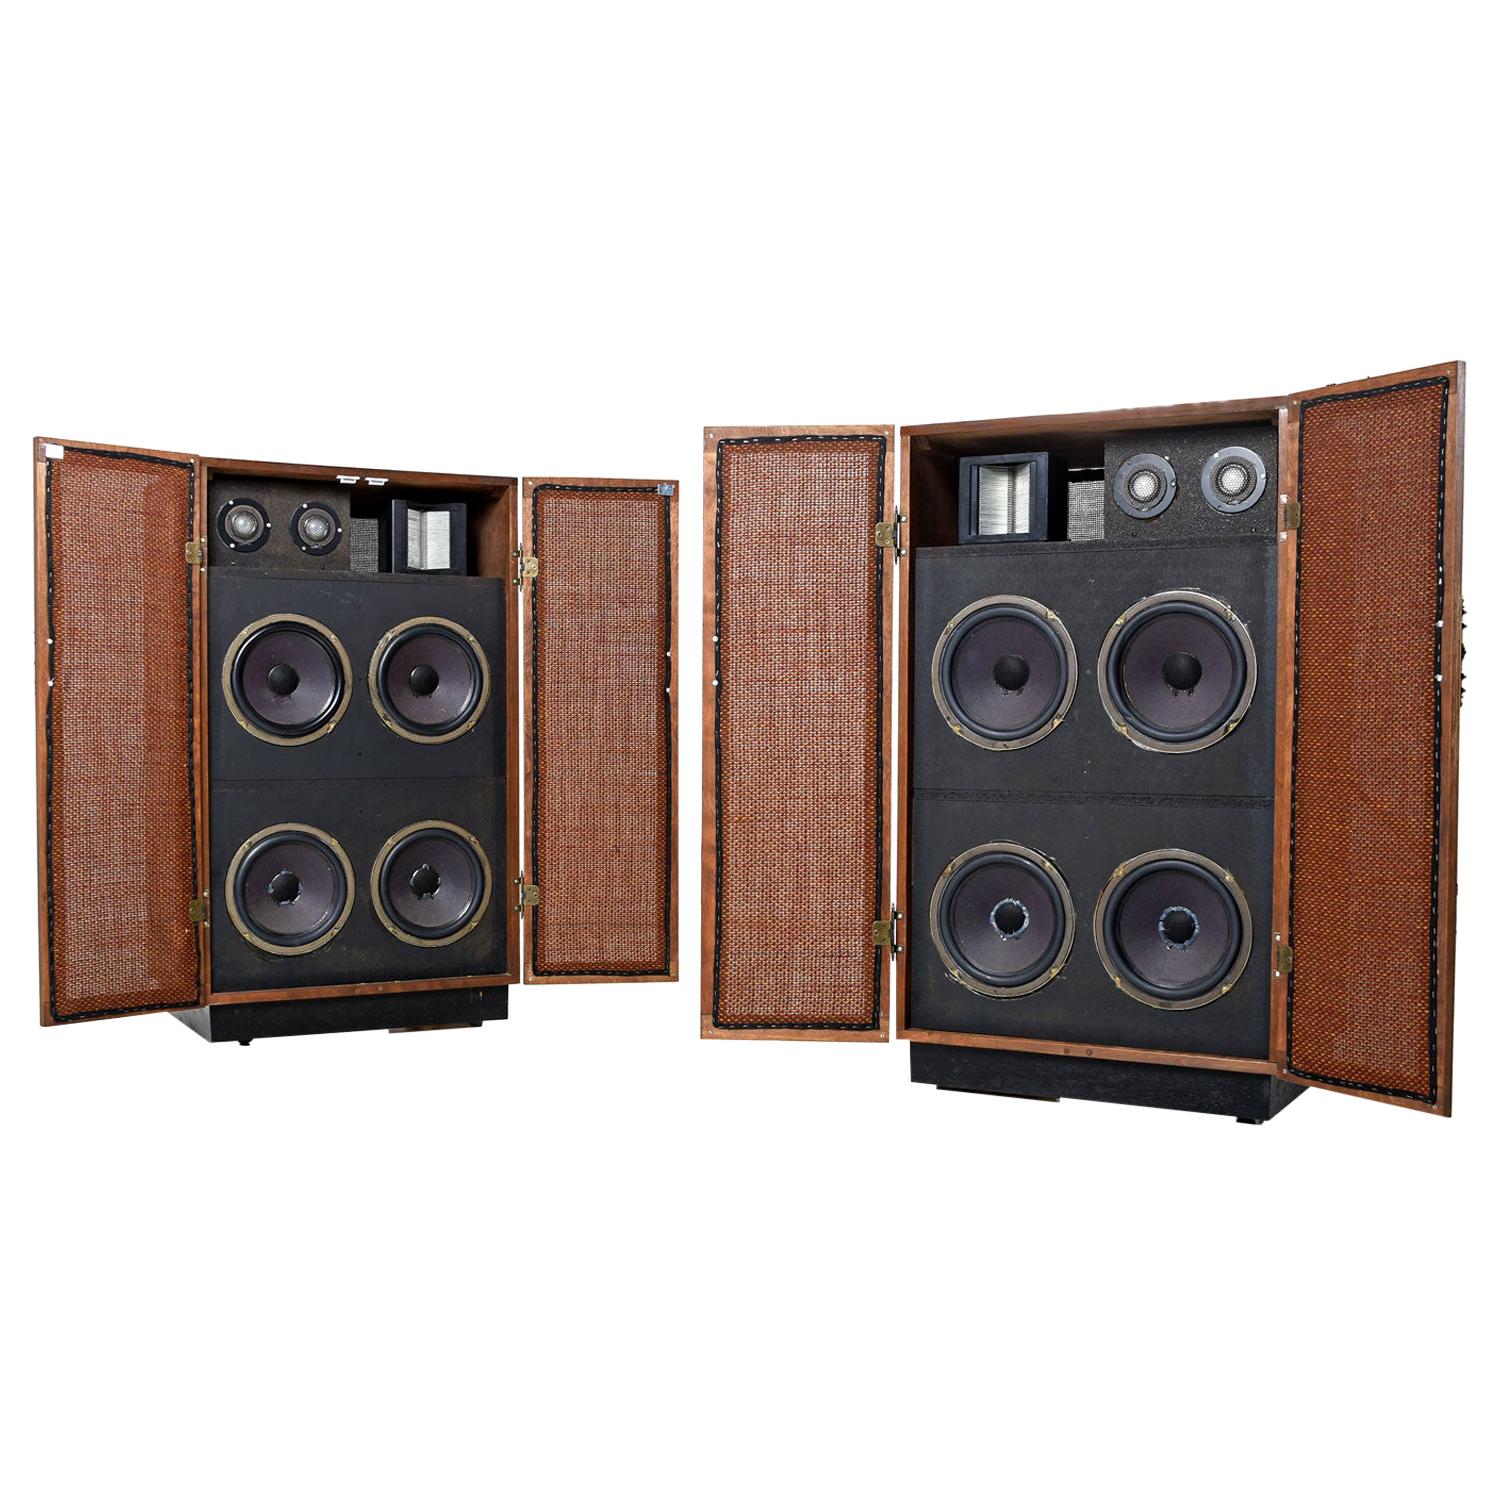 These speaker cabinets are enormous and sound just as amazing as they look. Four 10